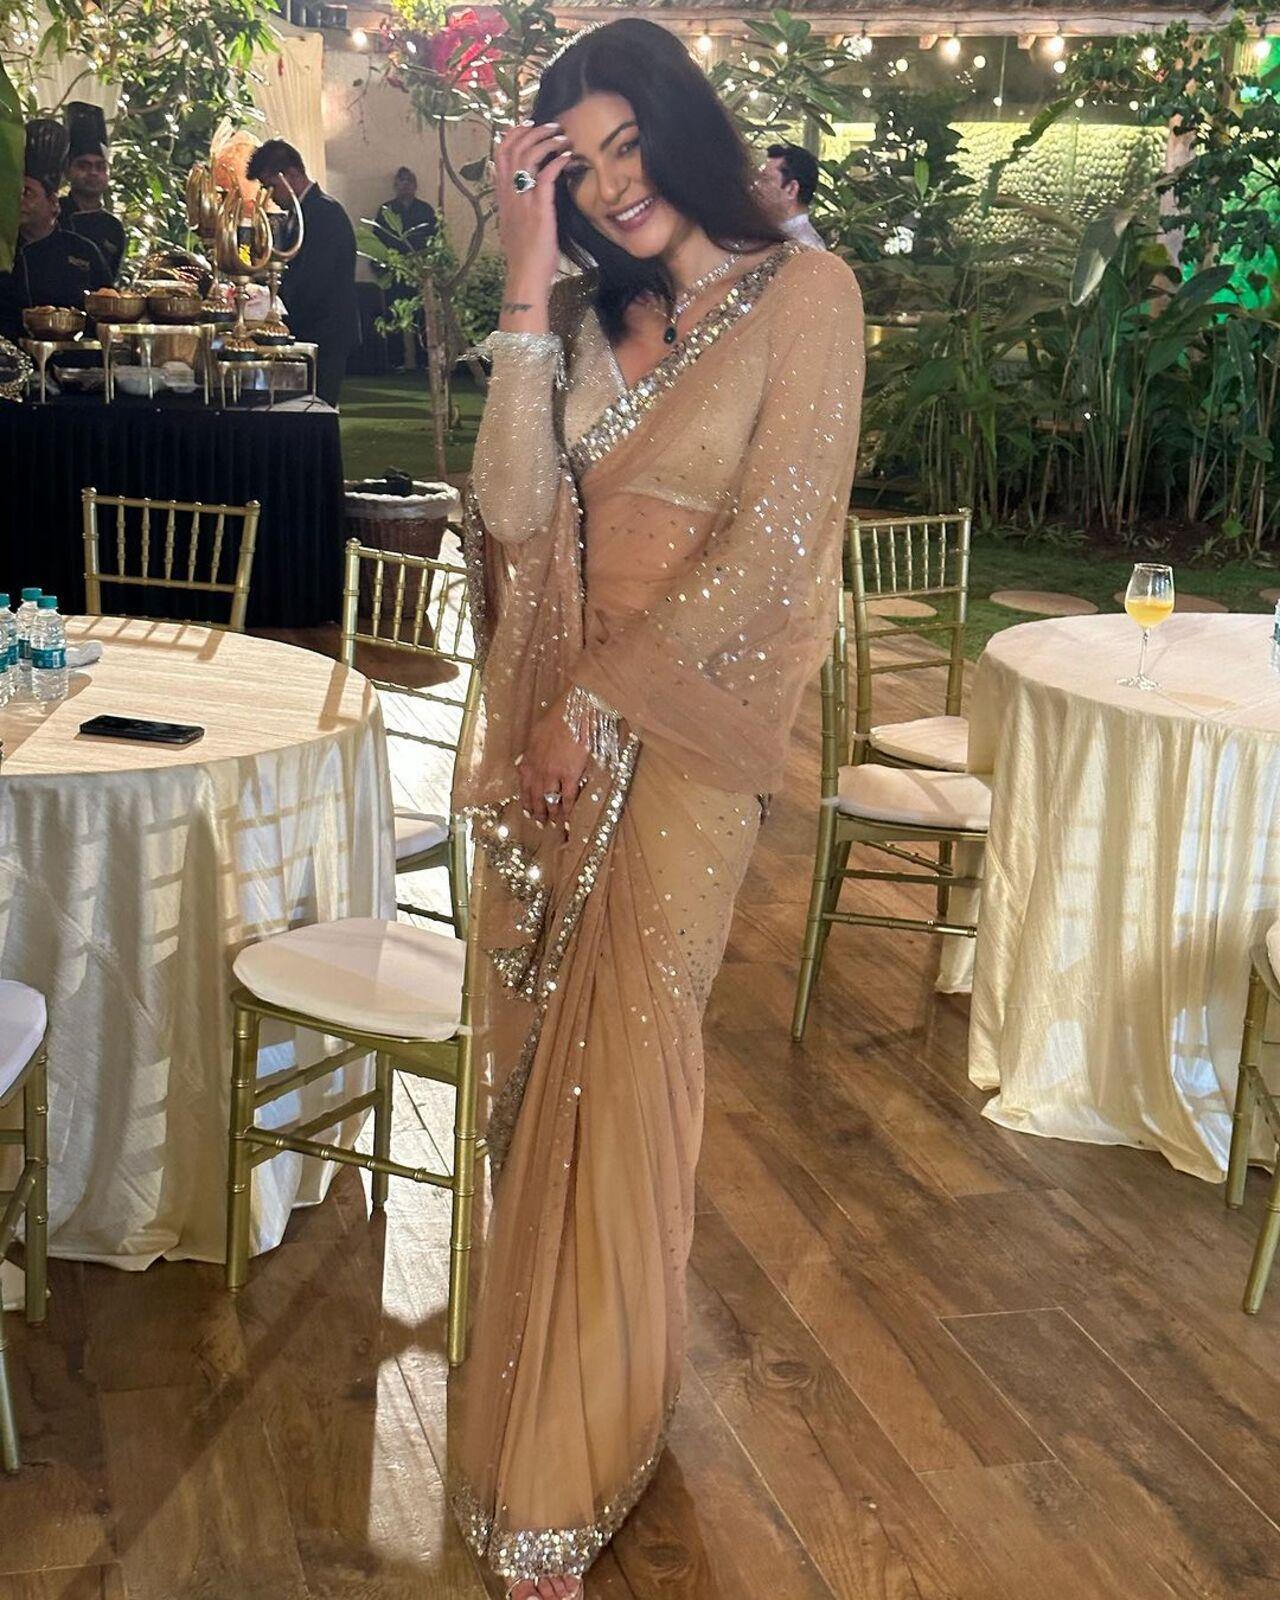 Sushmita Sen donned this 18-year-old saree for the Diwali party hosted by Shilpa Shetty last week. The actress had earlier worn this saree during  her appearance on Koffee With Karan, years ago